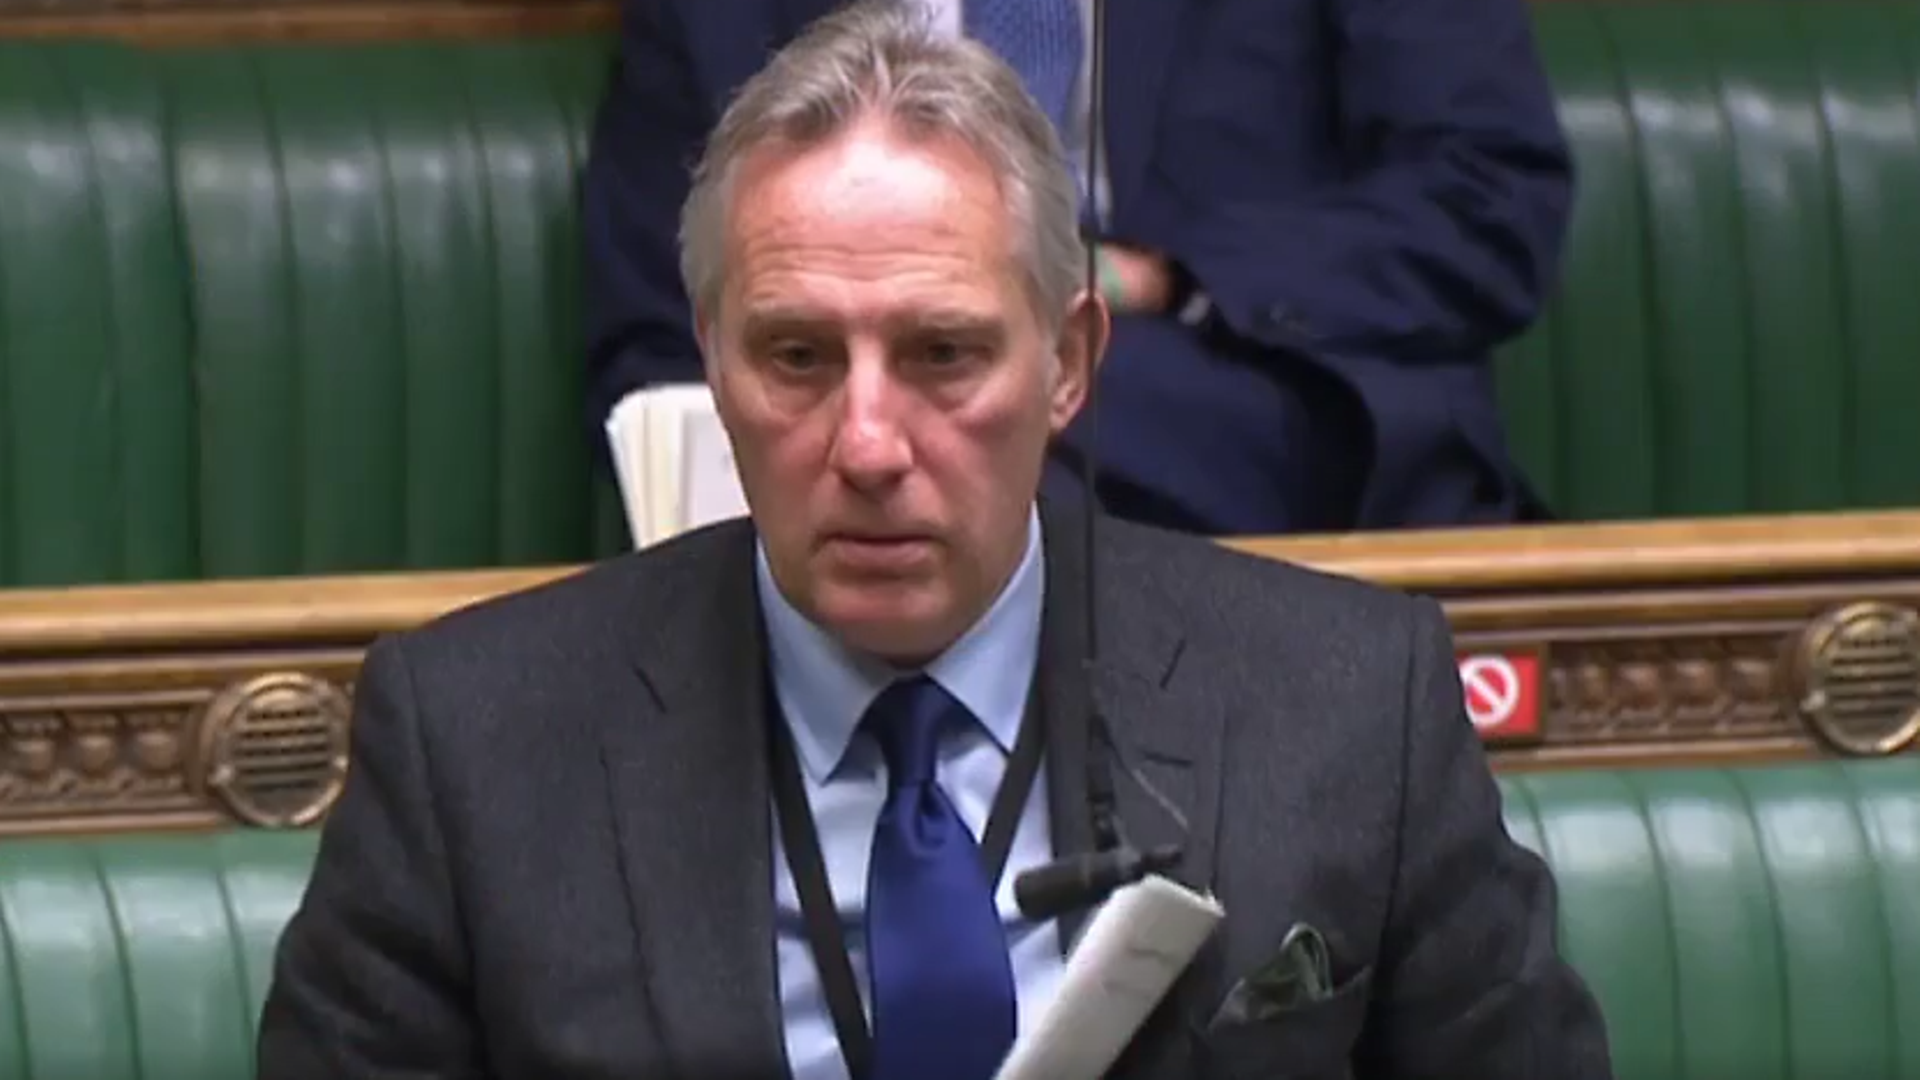 MP Ian Paisley in the House of Commons - Credit: Parliament Live